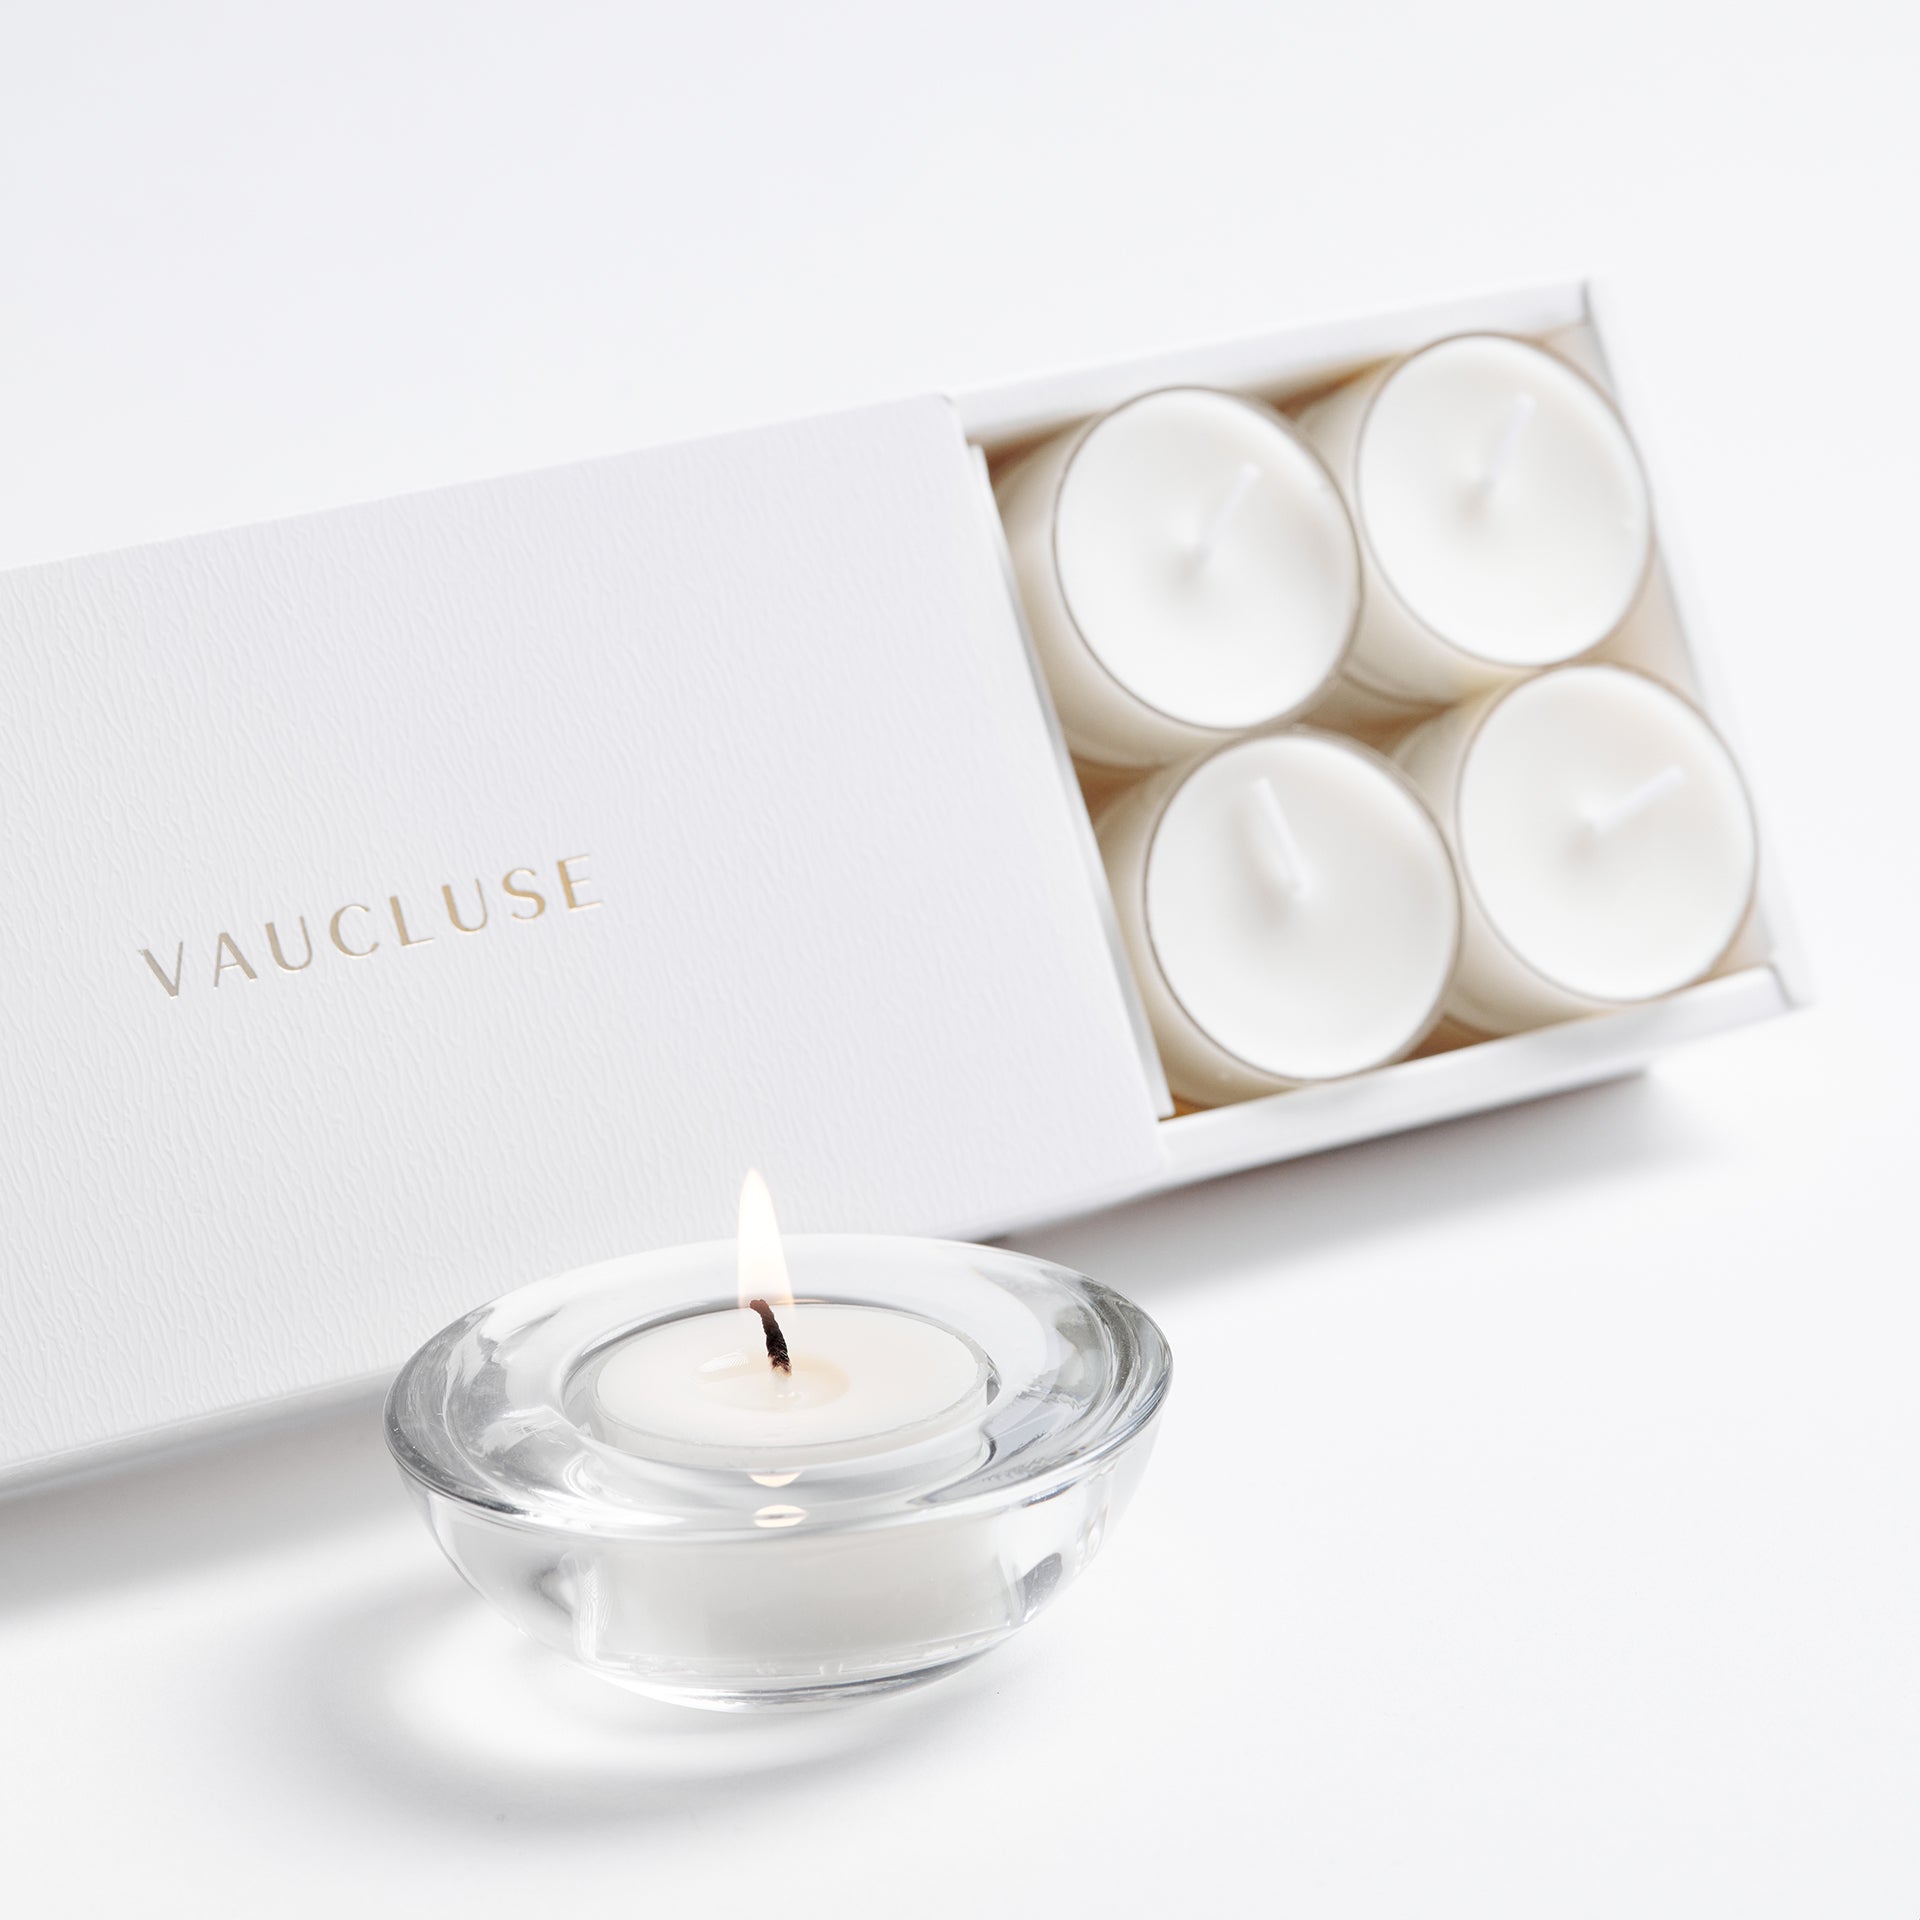 How to Melt Tealight Candles - VAUCLUSE